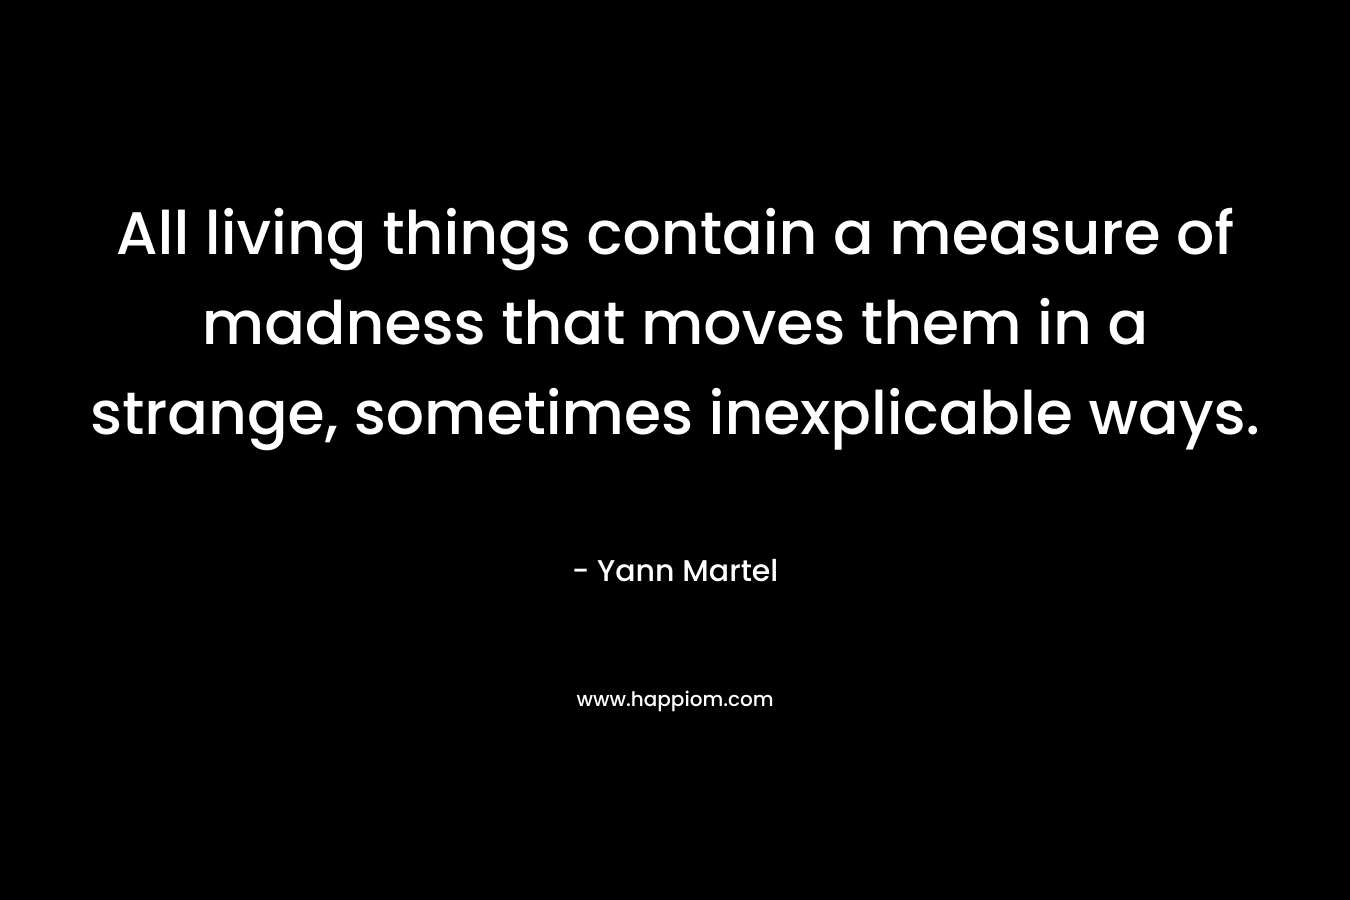 All living things contain a measure of madness that moves them in a strange, sometimes inexplicable ways. – Yann Martel